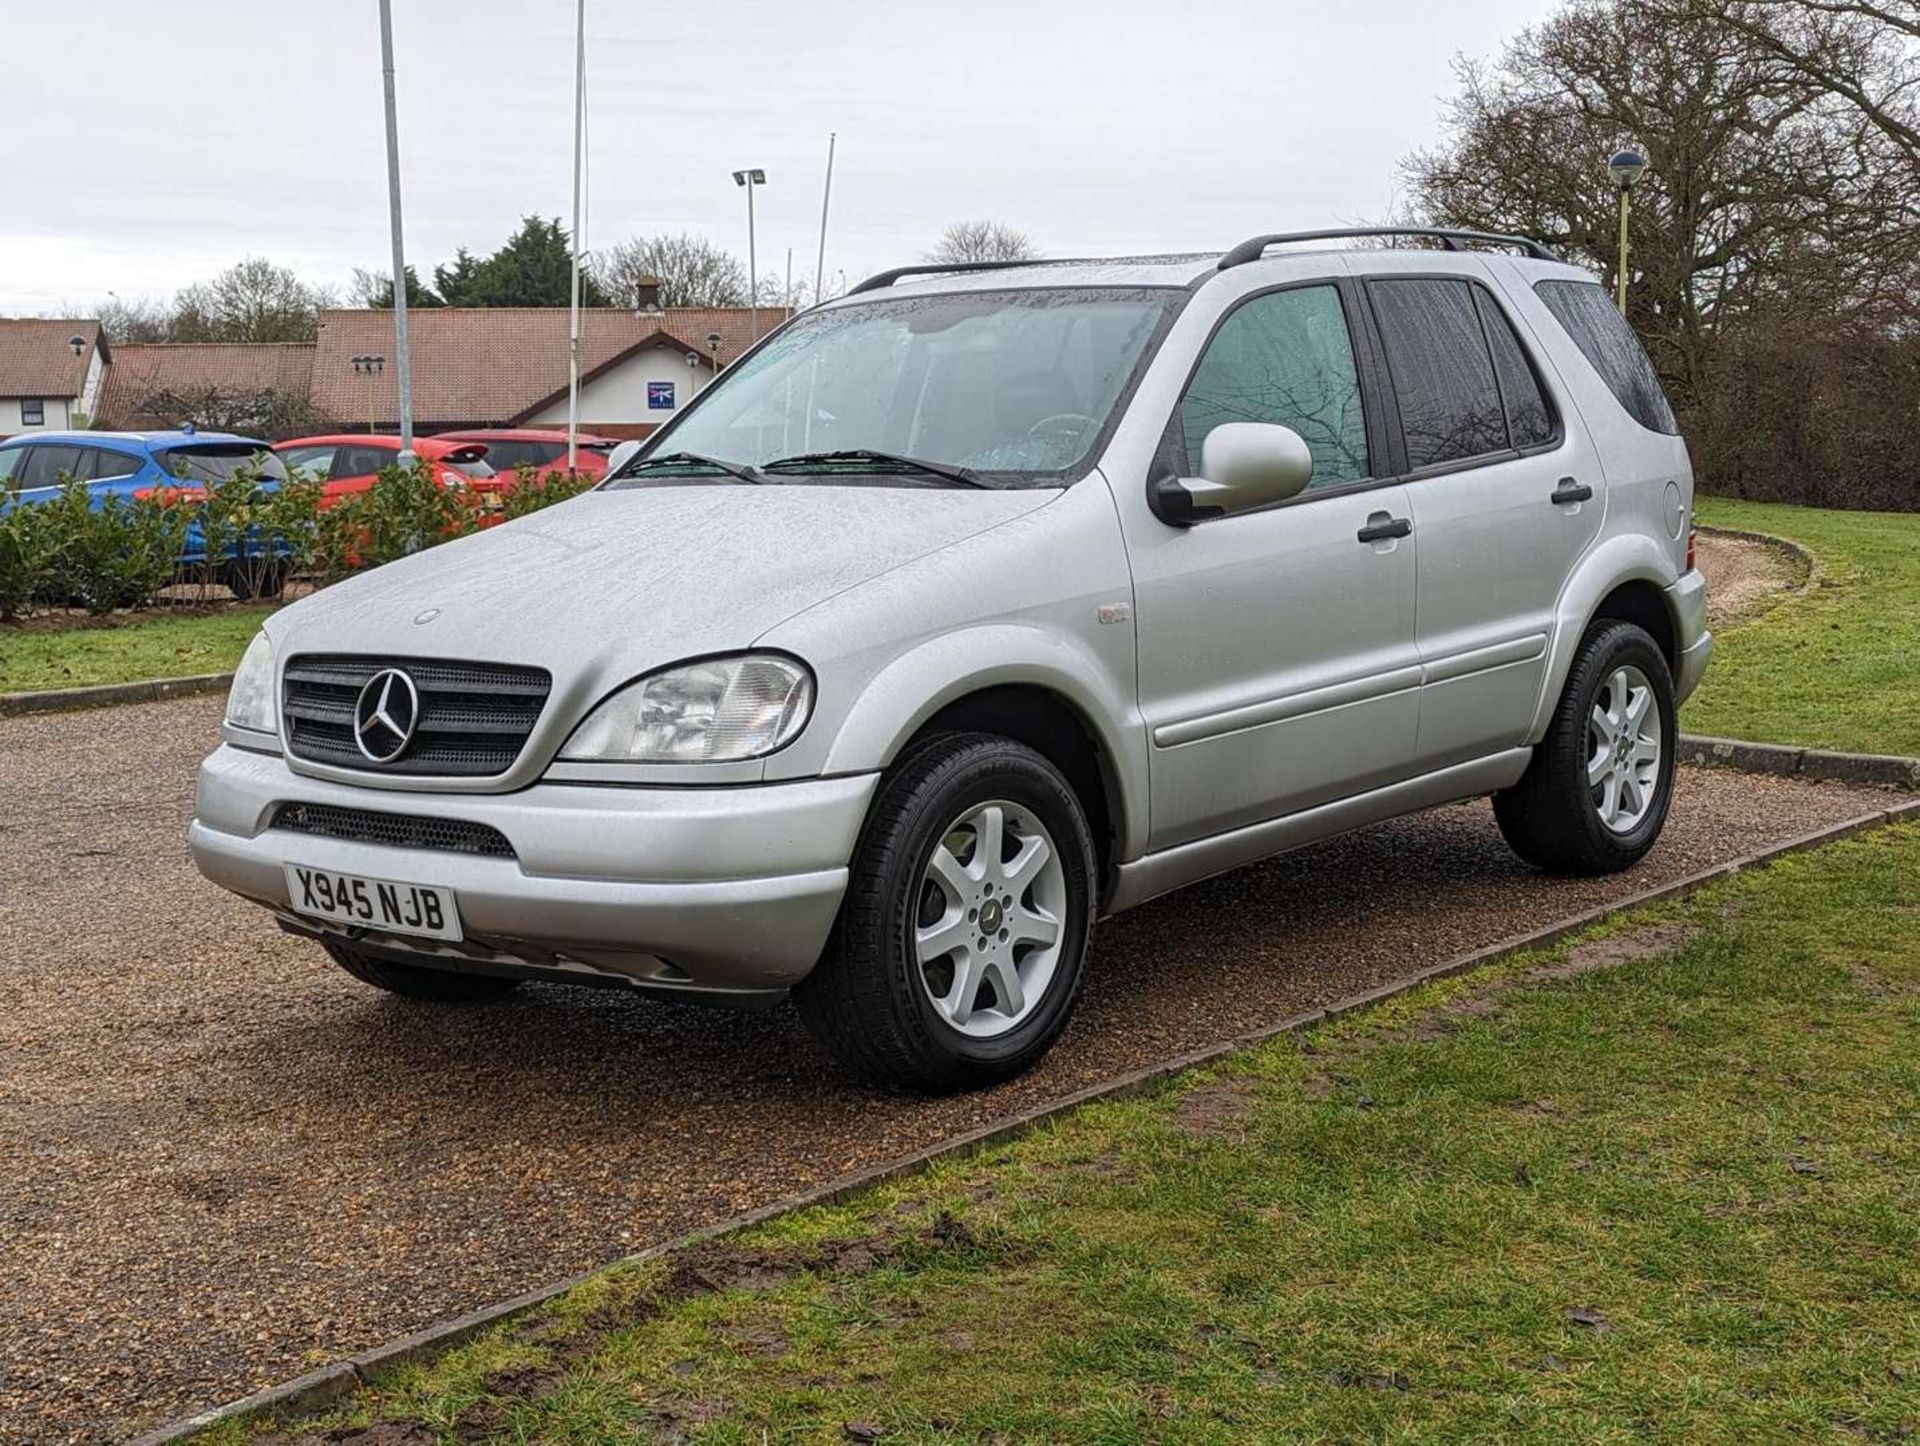 2001 MERCEDES ML 430 LHD - Image 3 of 24